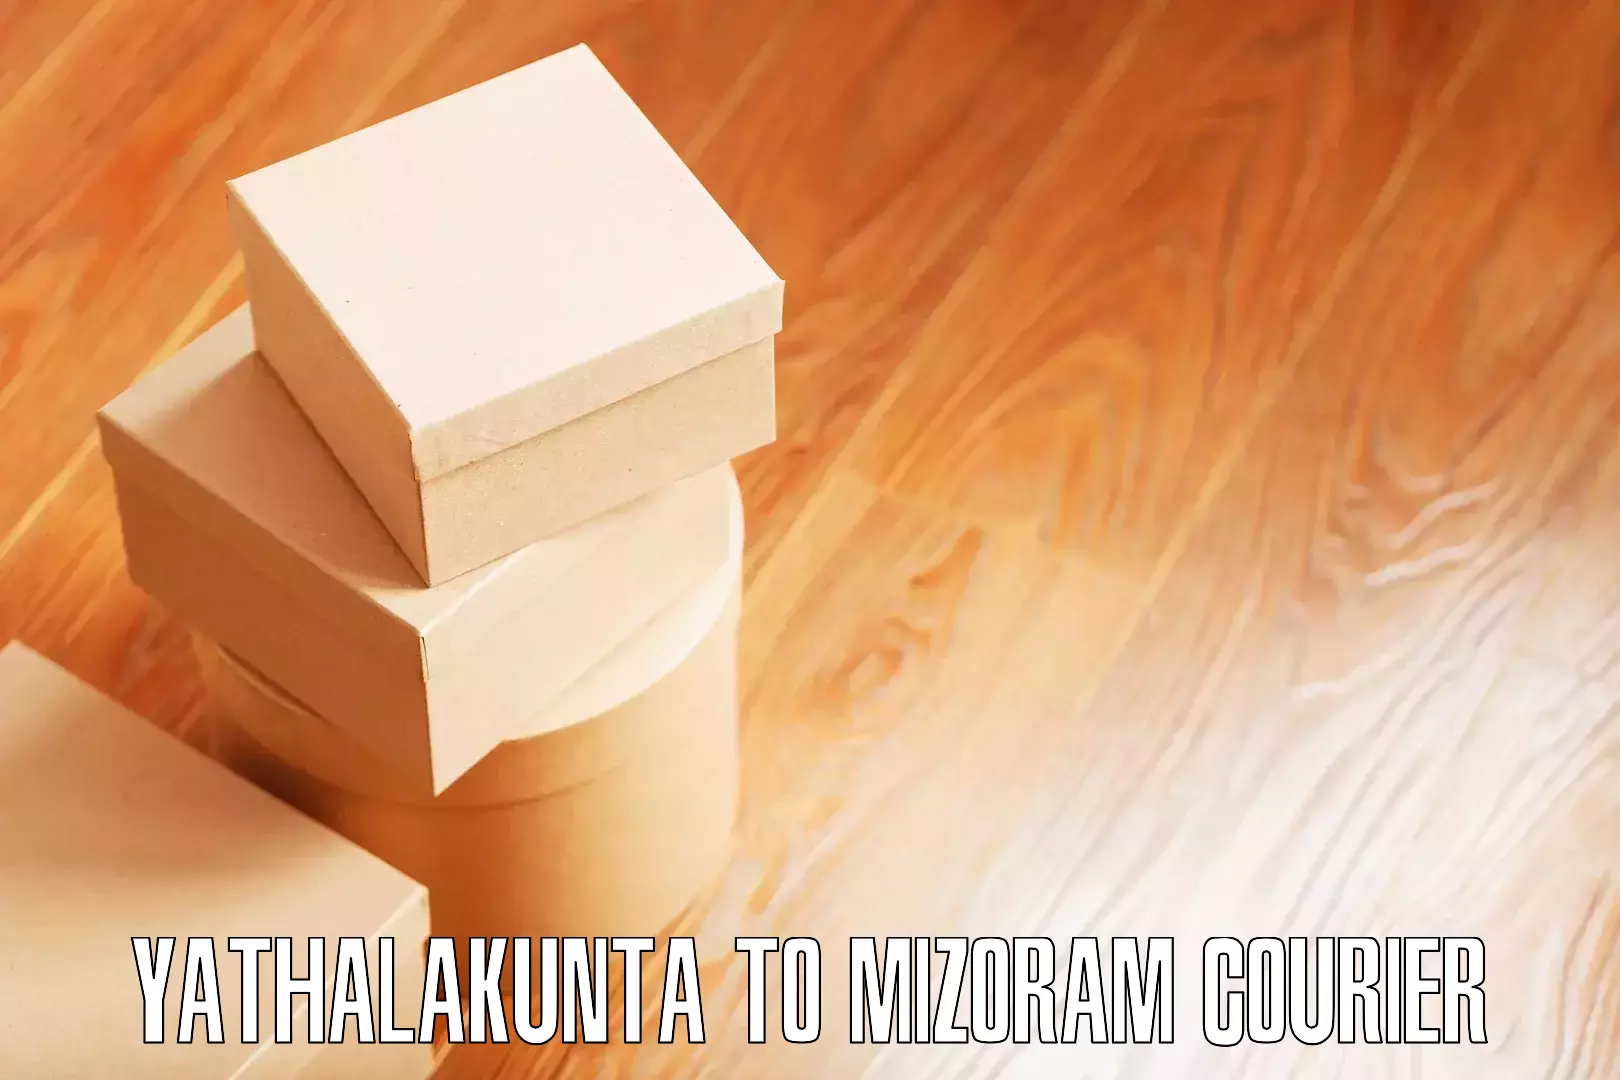 Reliable relocation services Yathalakunta to Khawzawl